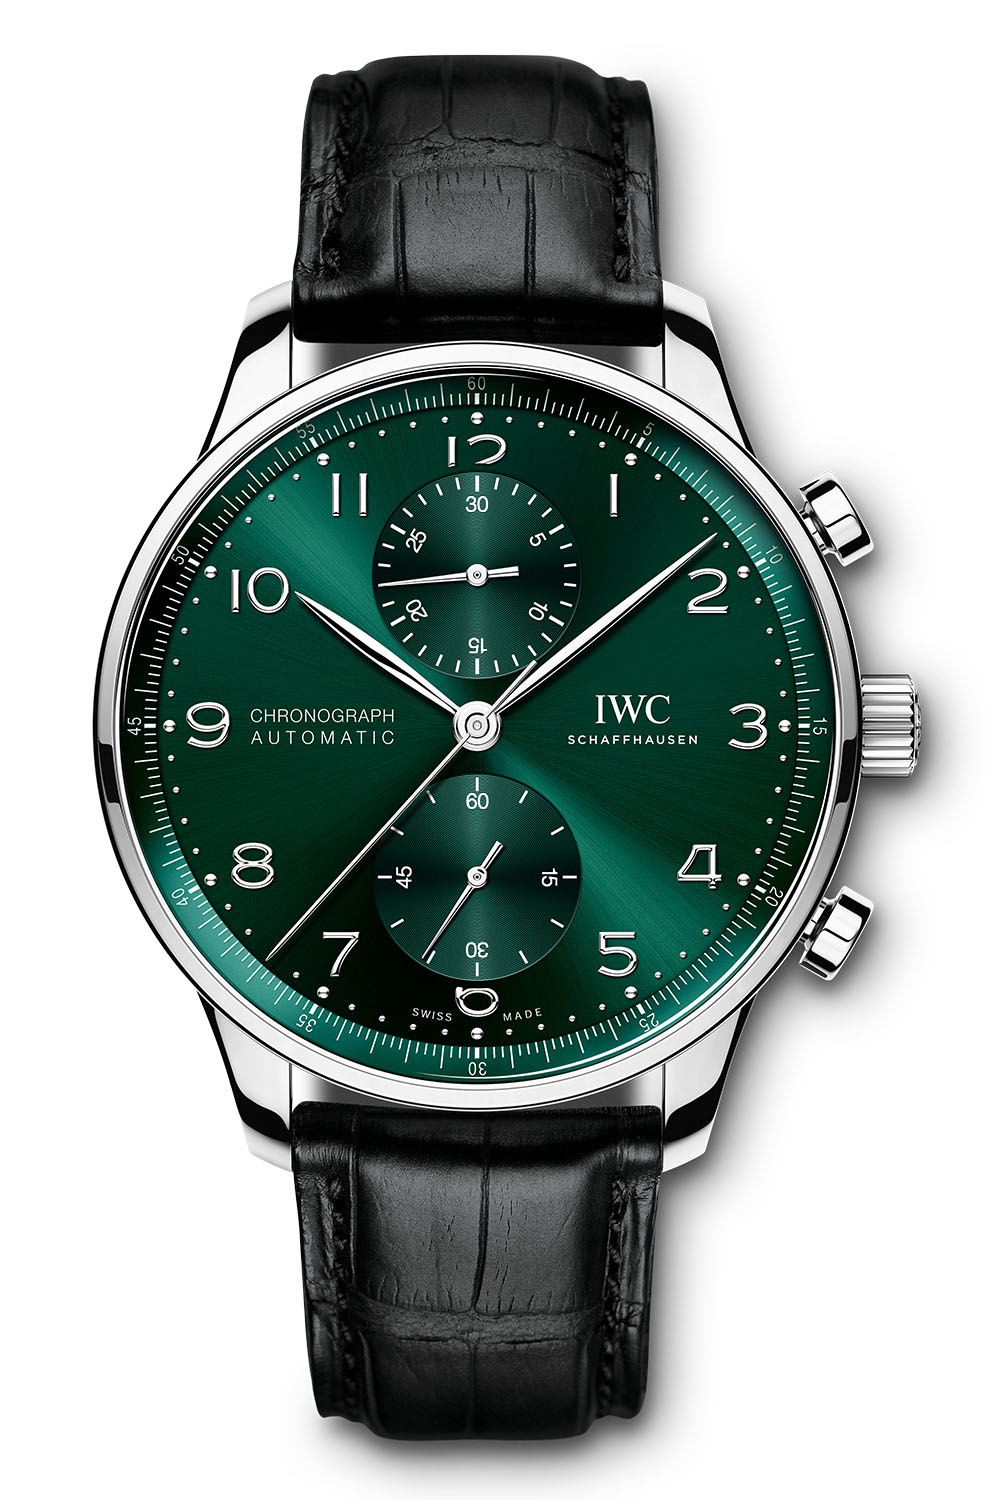 IWC Portugieser Chronograph automatic green dial iw371615 - 1